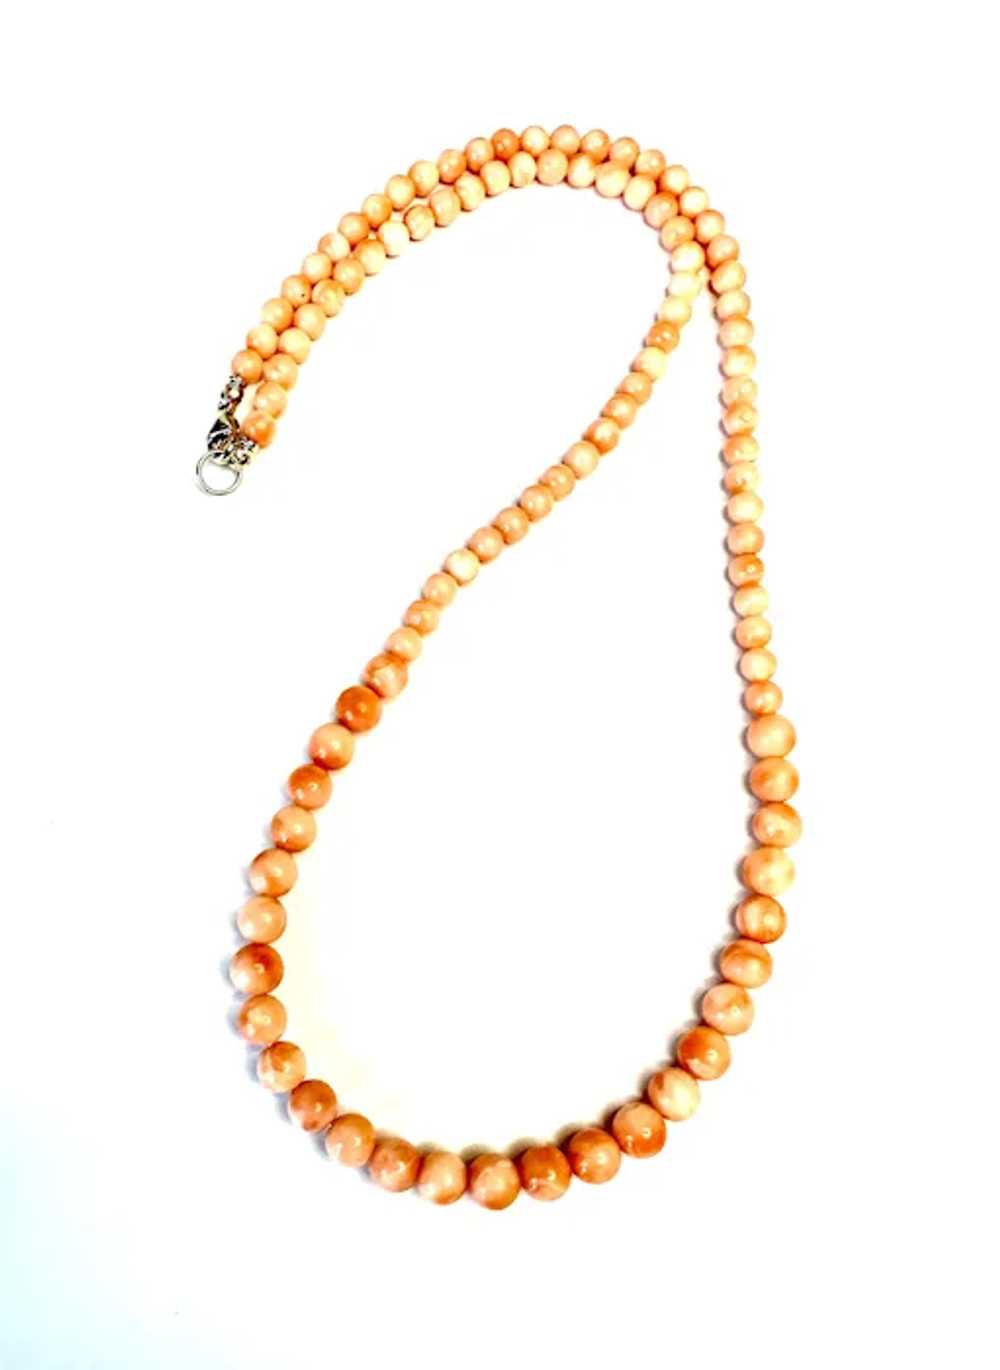 14k Gold and Angel Skin Coral Necklace - image 3